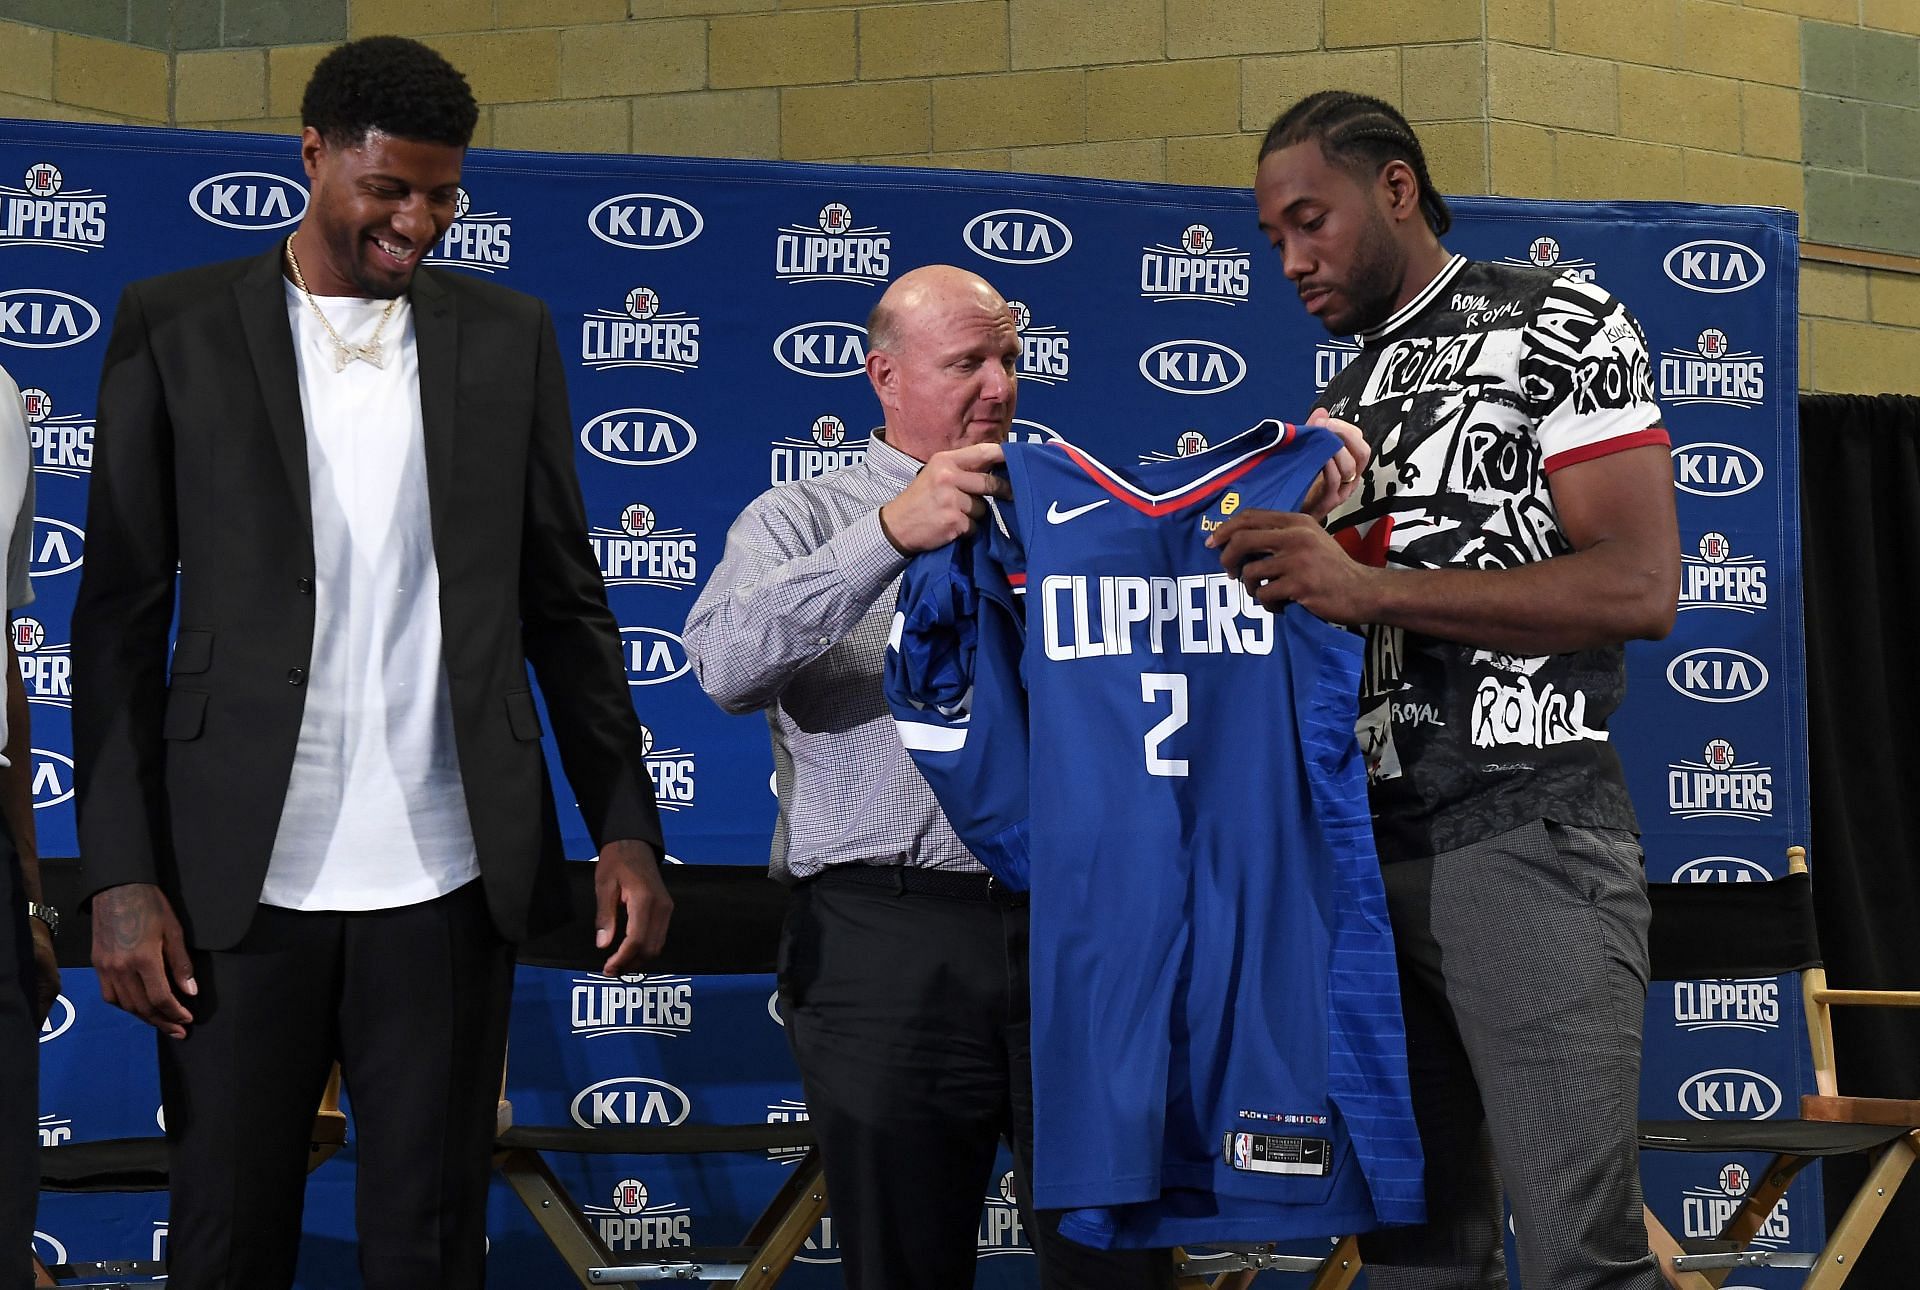 Ballmer is committed to his two star players, but this may be a wrong move. (Image via Getty Images)